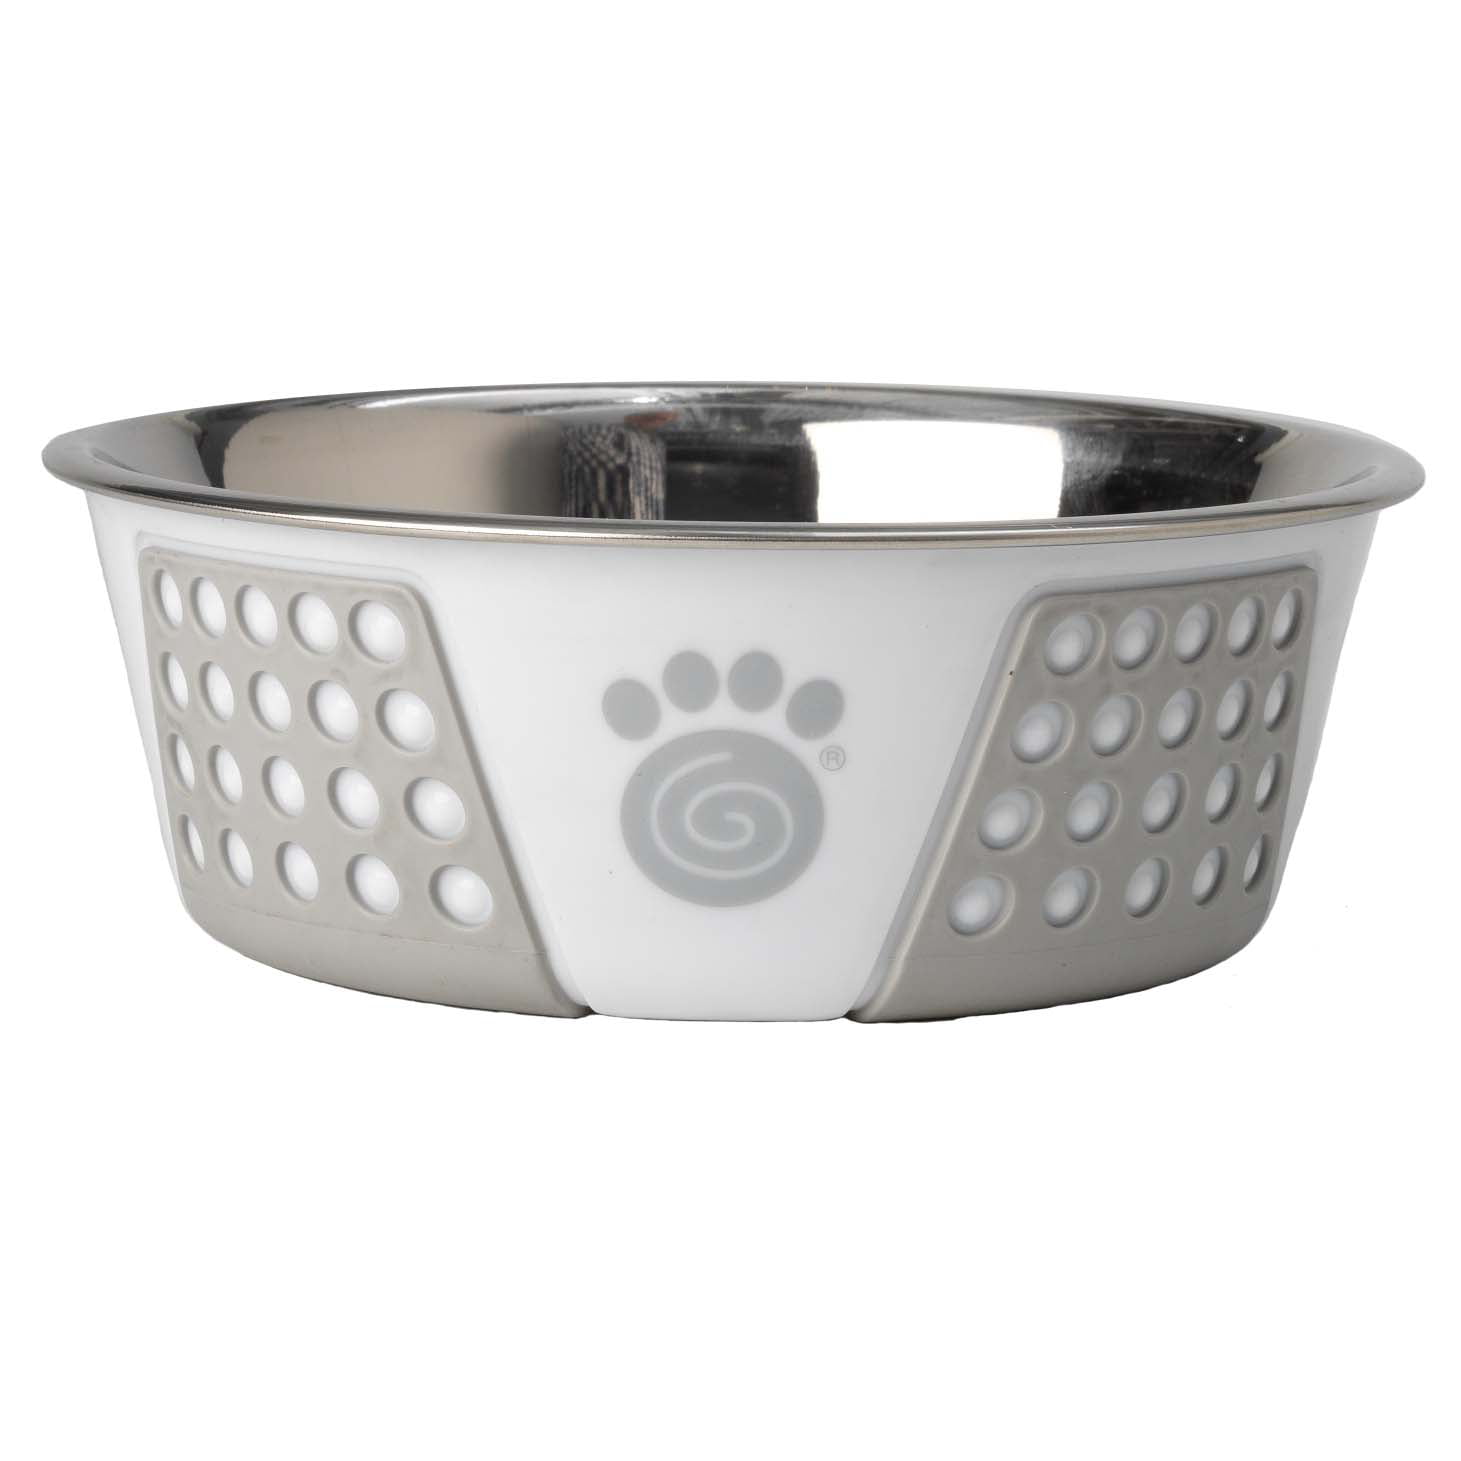 PetRageous 16020 Kona Stainless-Steel Non-Slip Dishwasher Safe Bowl 6.5-Cup 8.5-Inch Diameter 2.75-Inch Tall for Large and Extra Large Dogs and Cats Charcoal Gray 